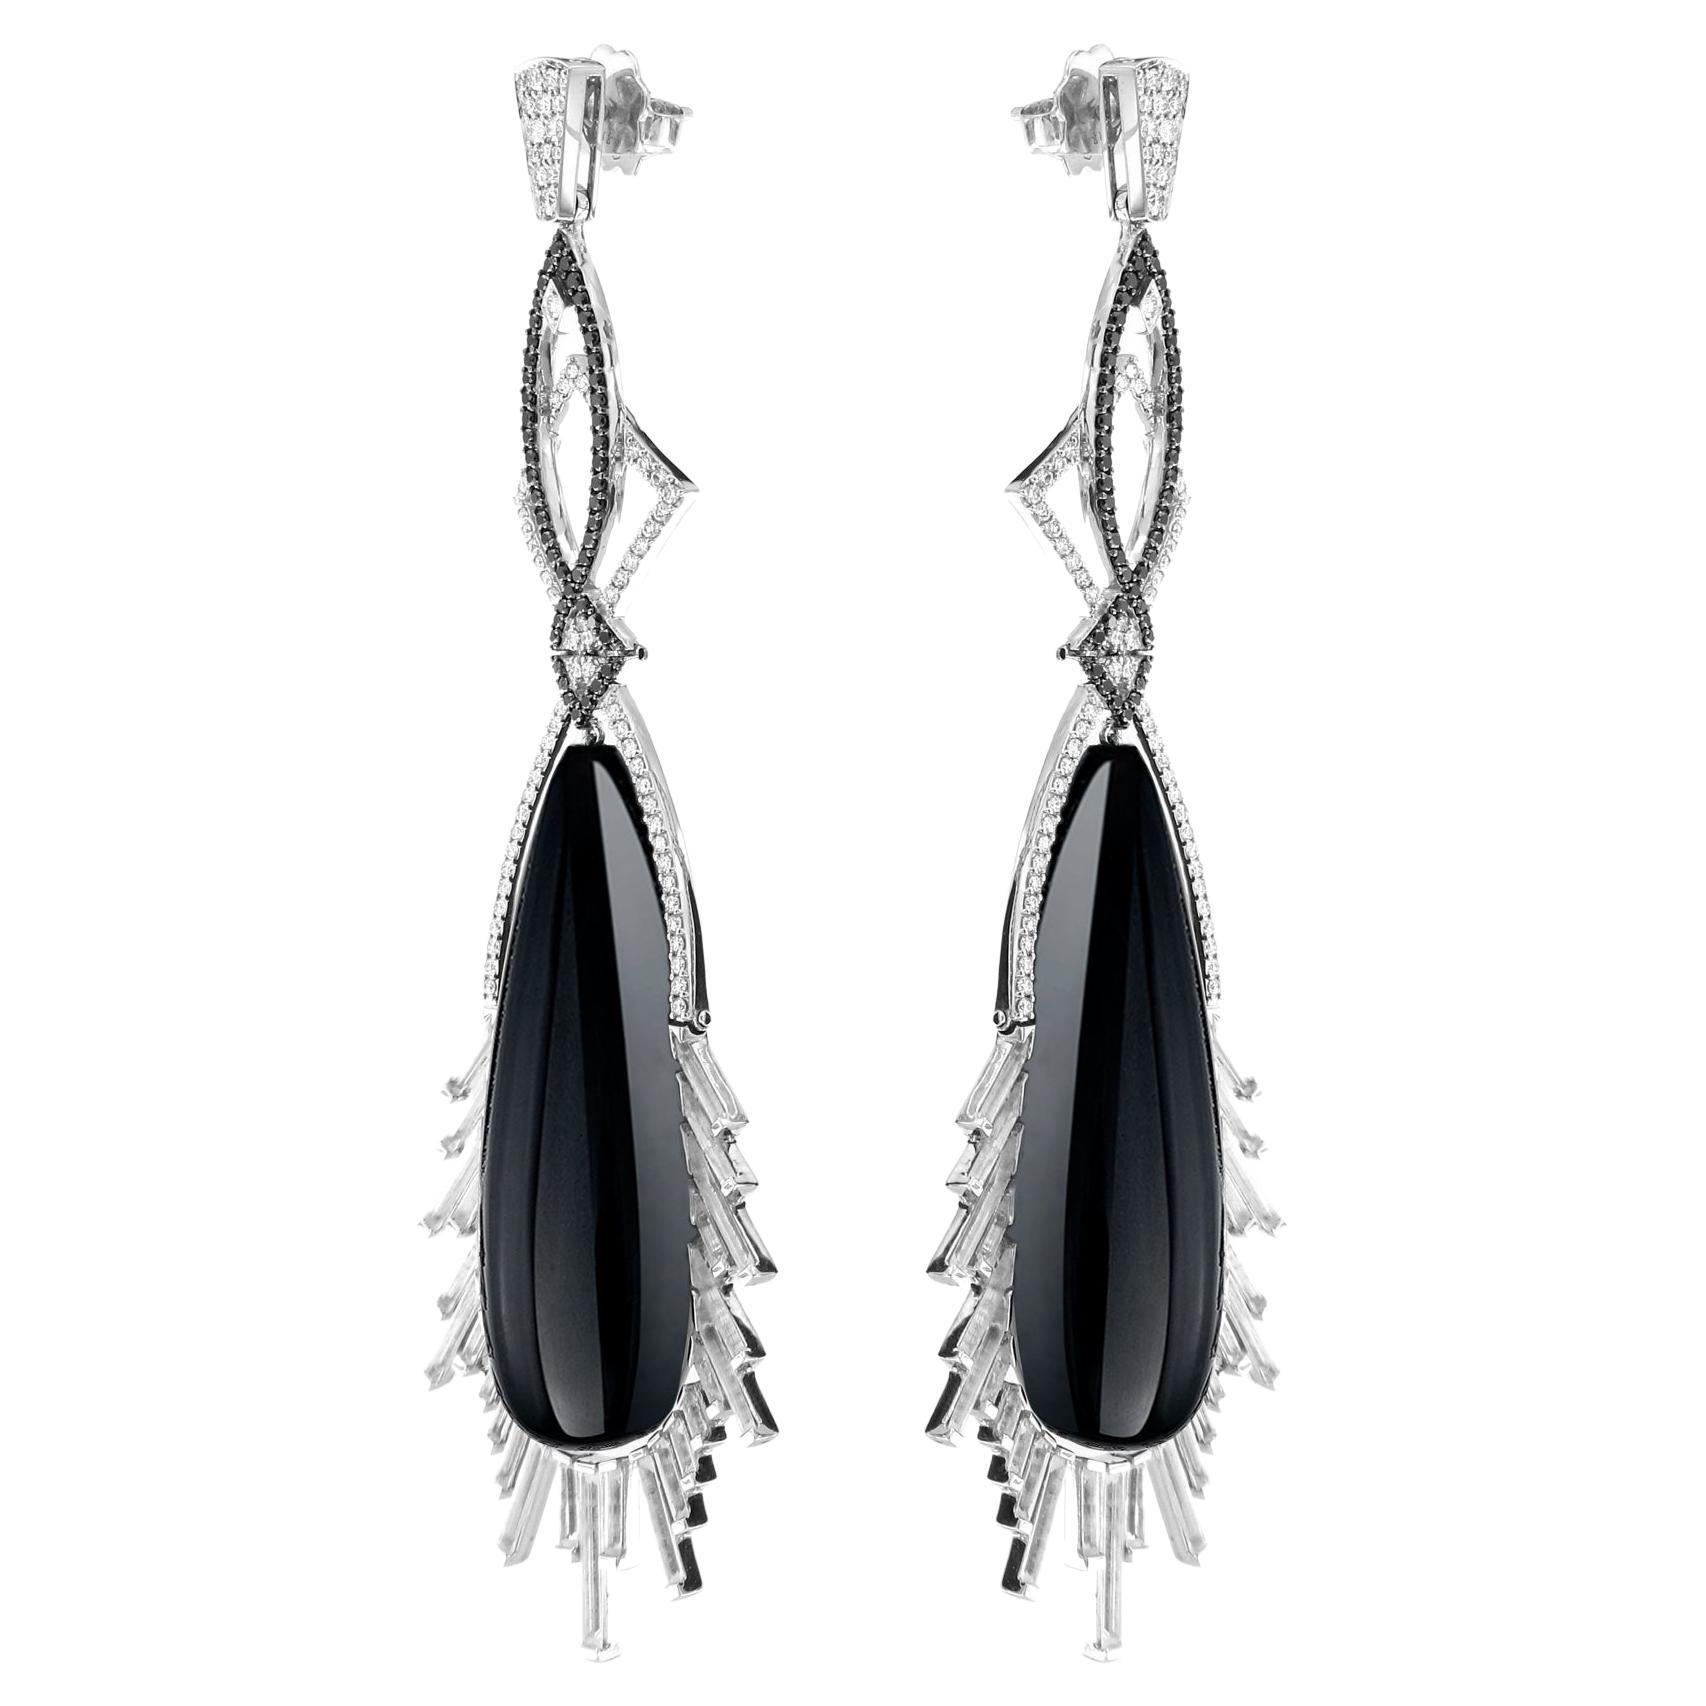 An impressive 88.54 carats of custom made black onyx make this a striking pair of 18k white gold earrings. Carefully carved rock crystal combine with black and white diamonds to make quite the statement.

Our products use natural F VVS diamonds for